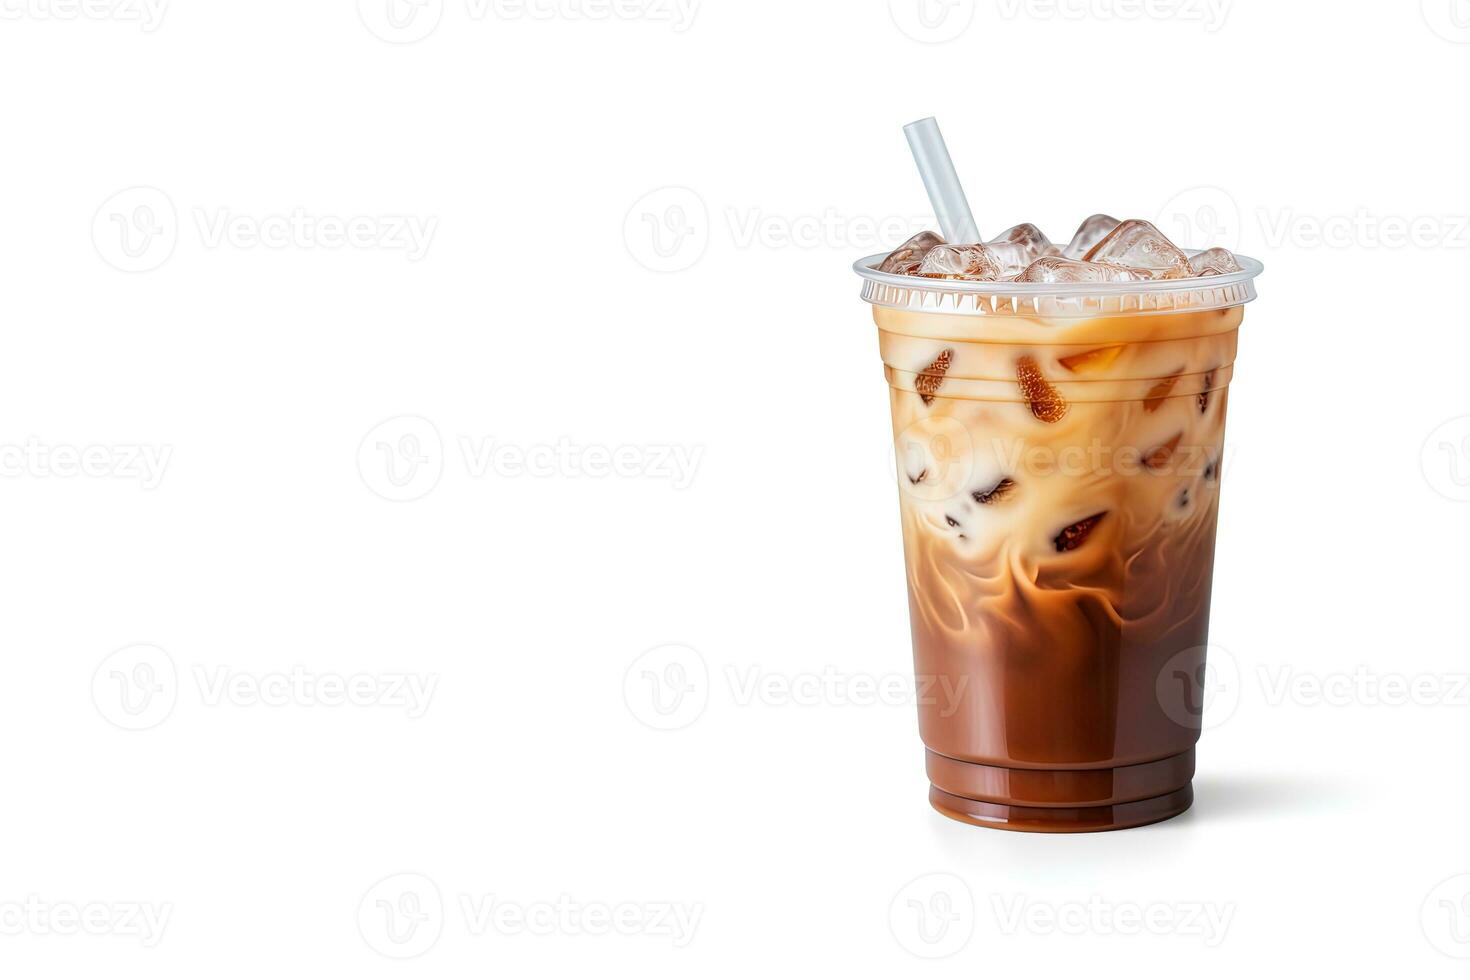 Iced Latte Or Iced Coffee In Takeaway Cup On White Background